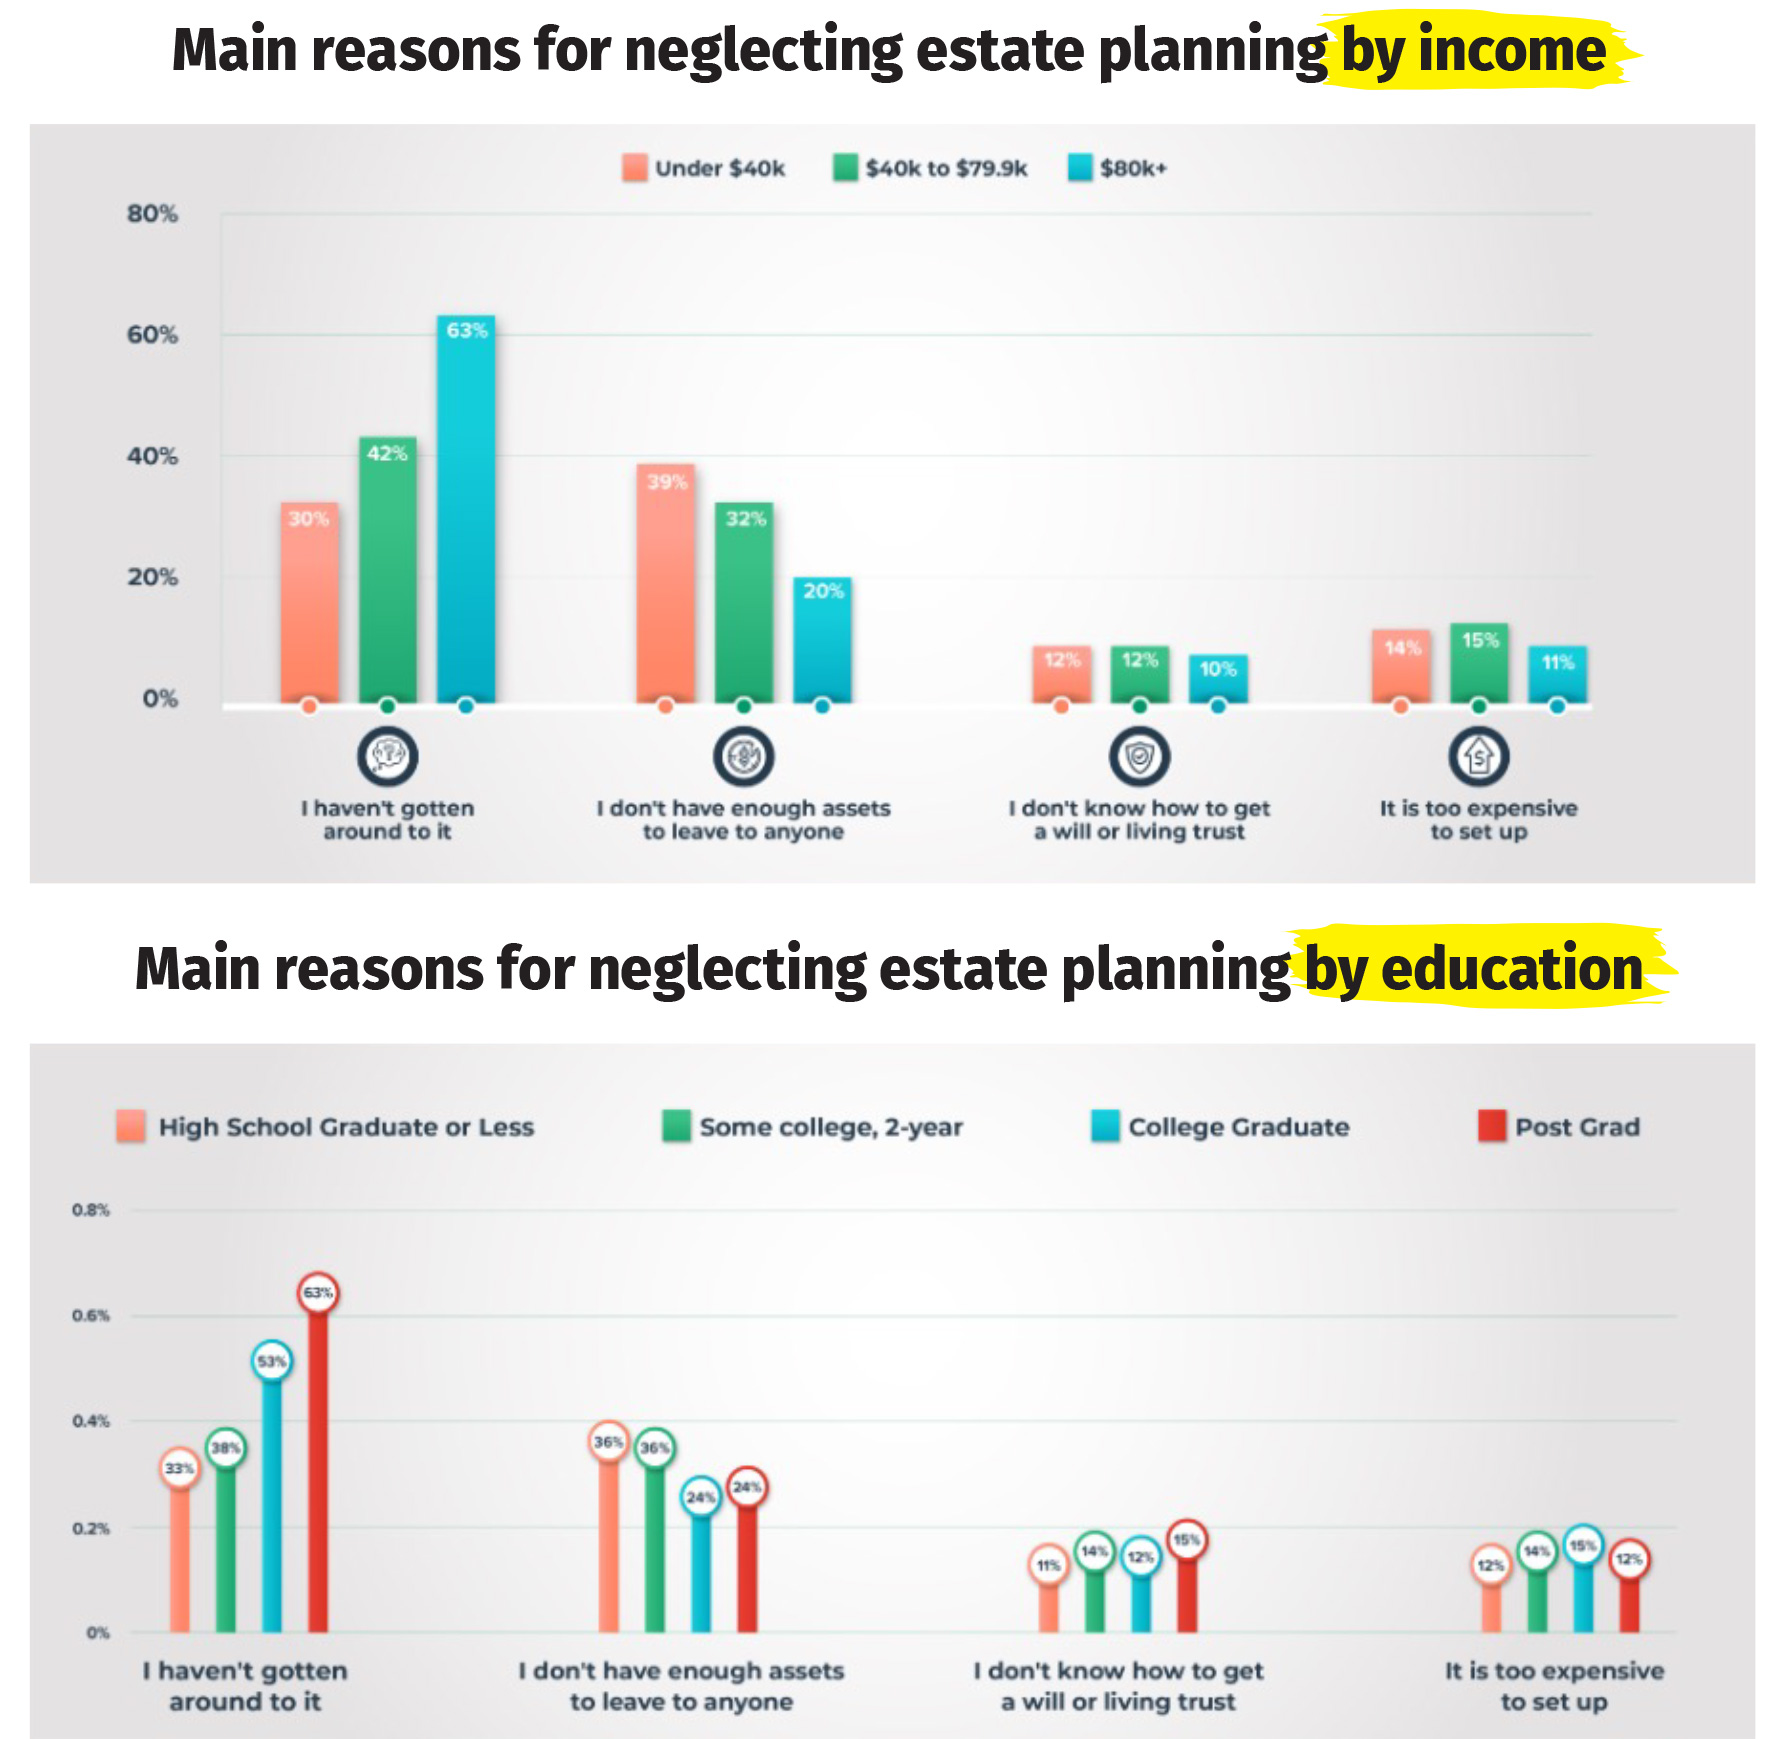 Two charts depicting the main reasons for neglecting estate planning by income and education.